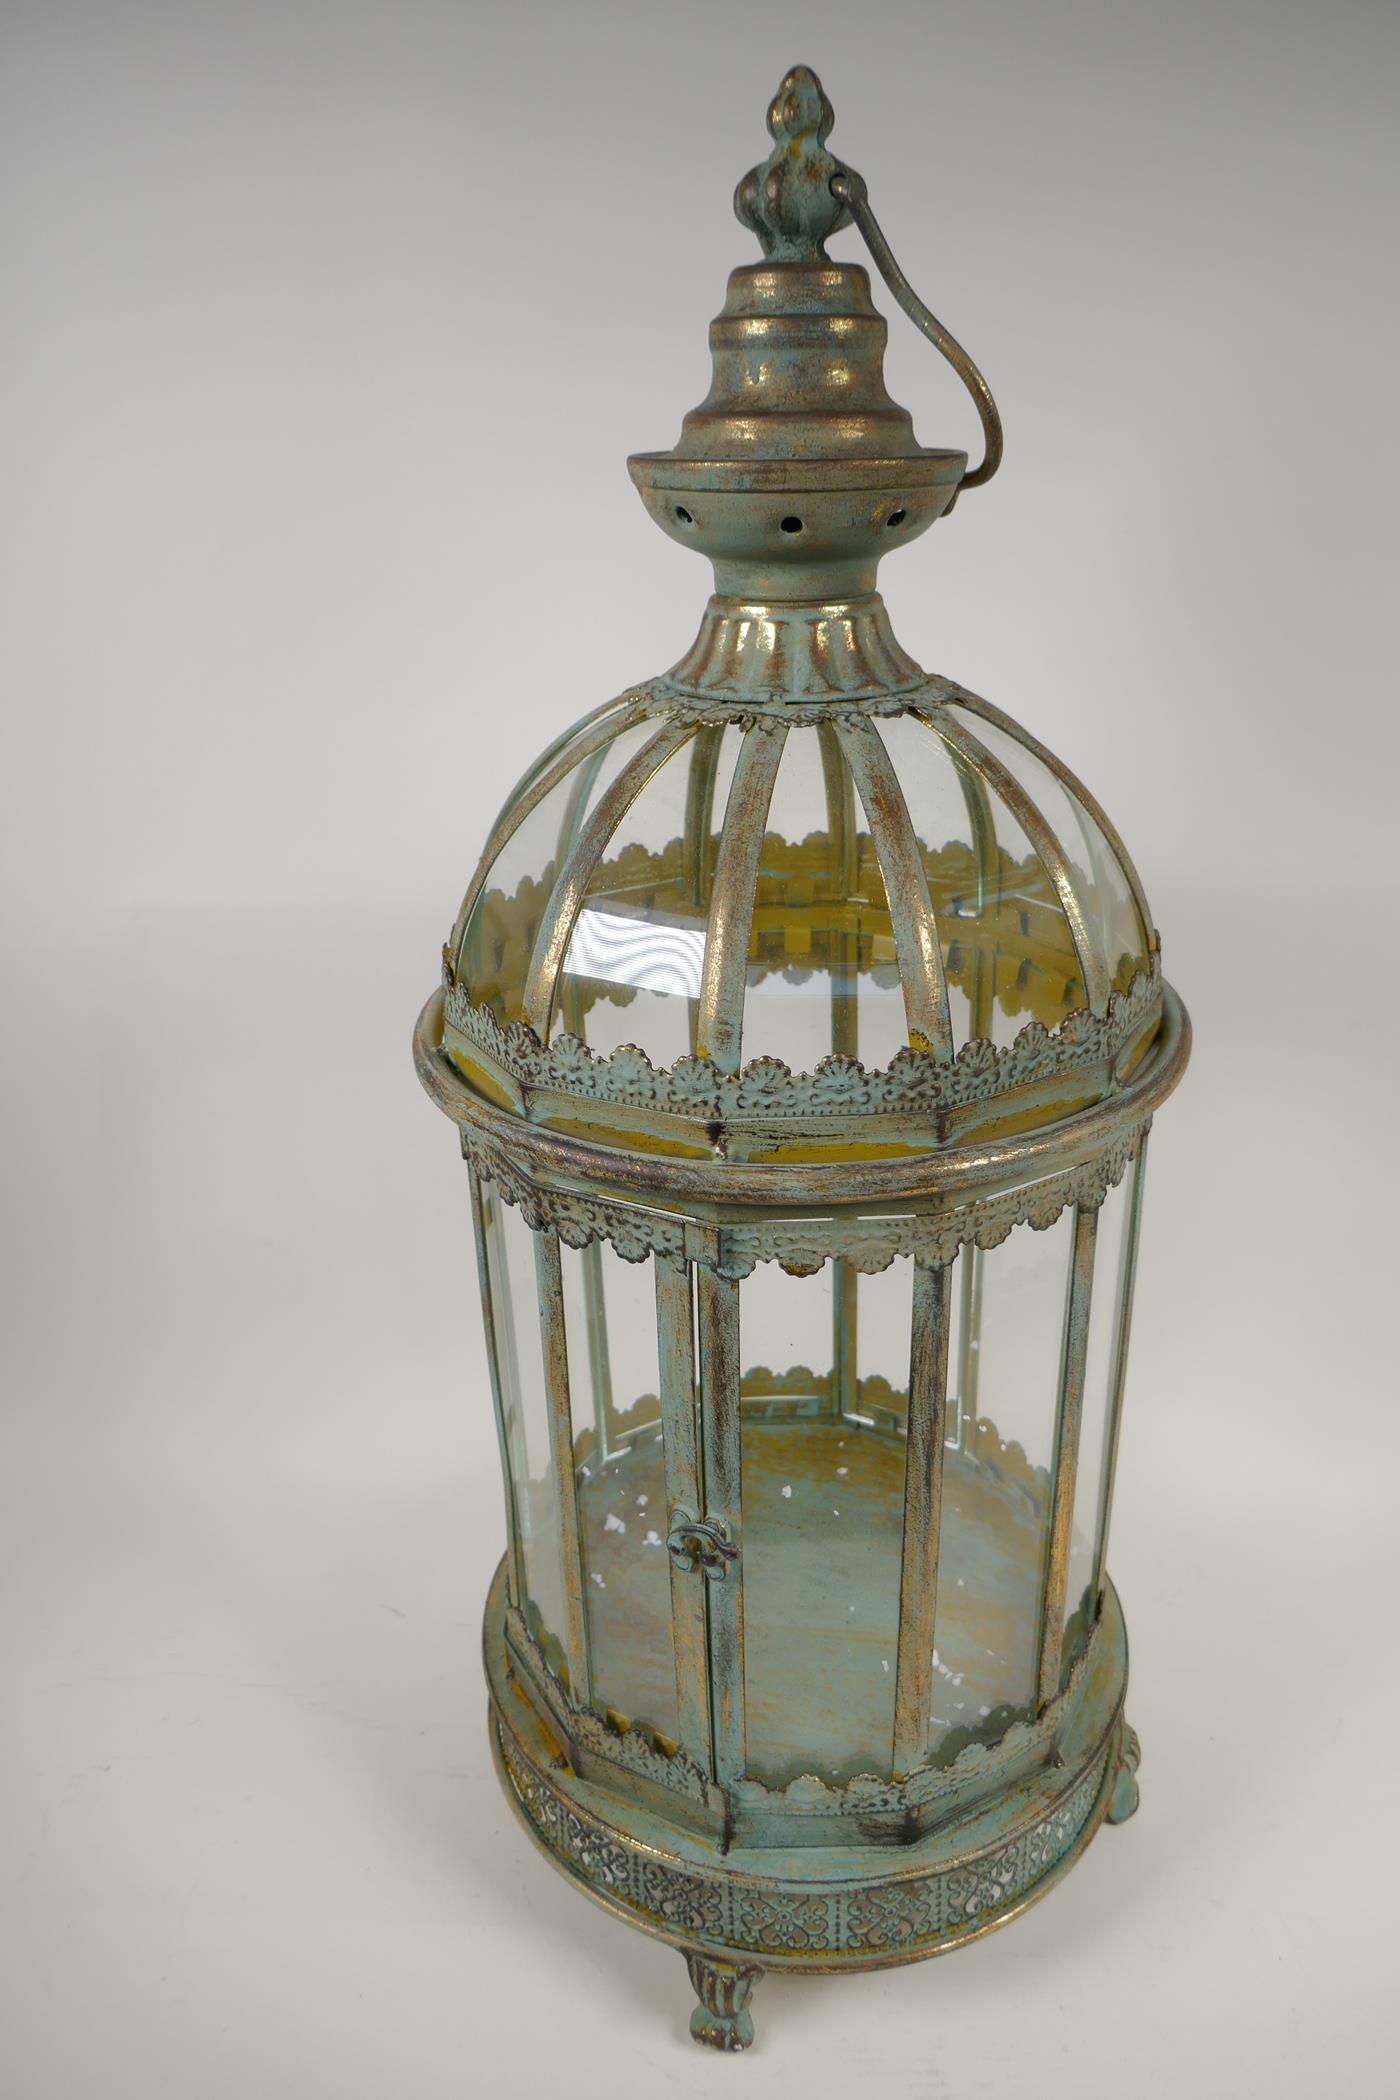 A twelve sided metal and glass garden lantern, 24" high - Image 2 of 3